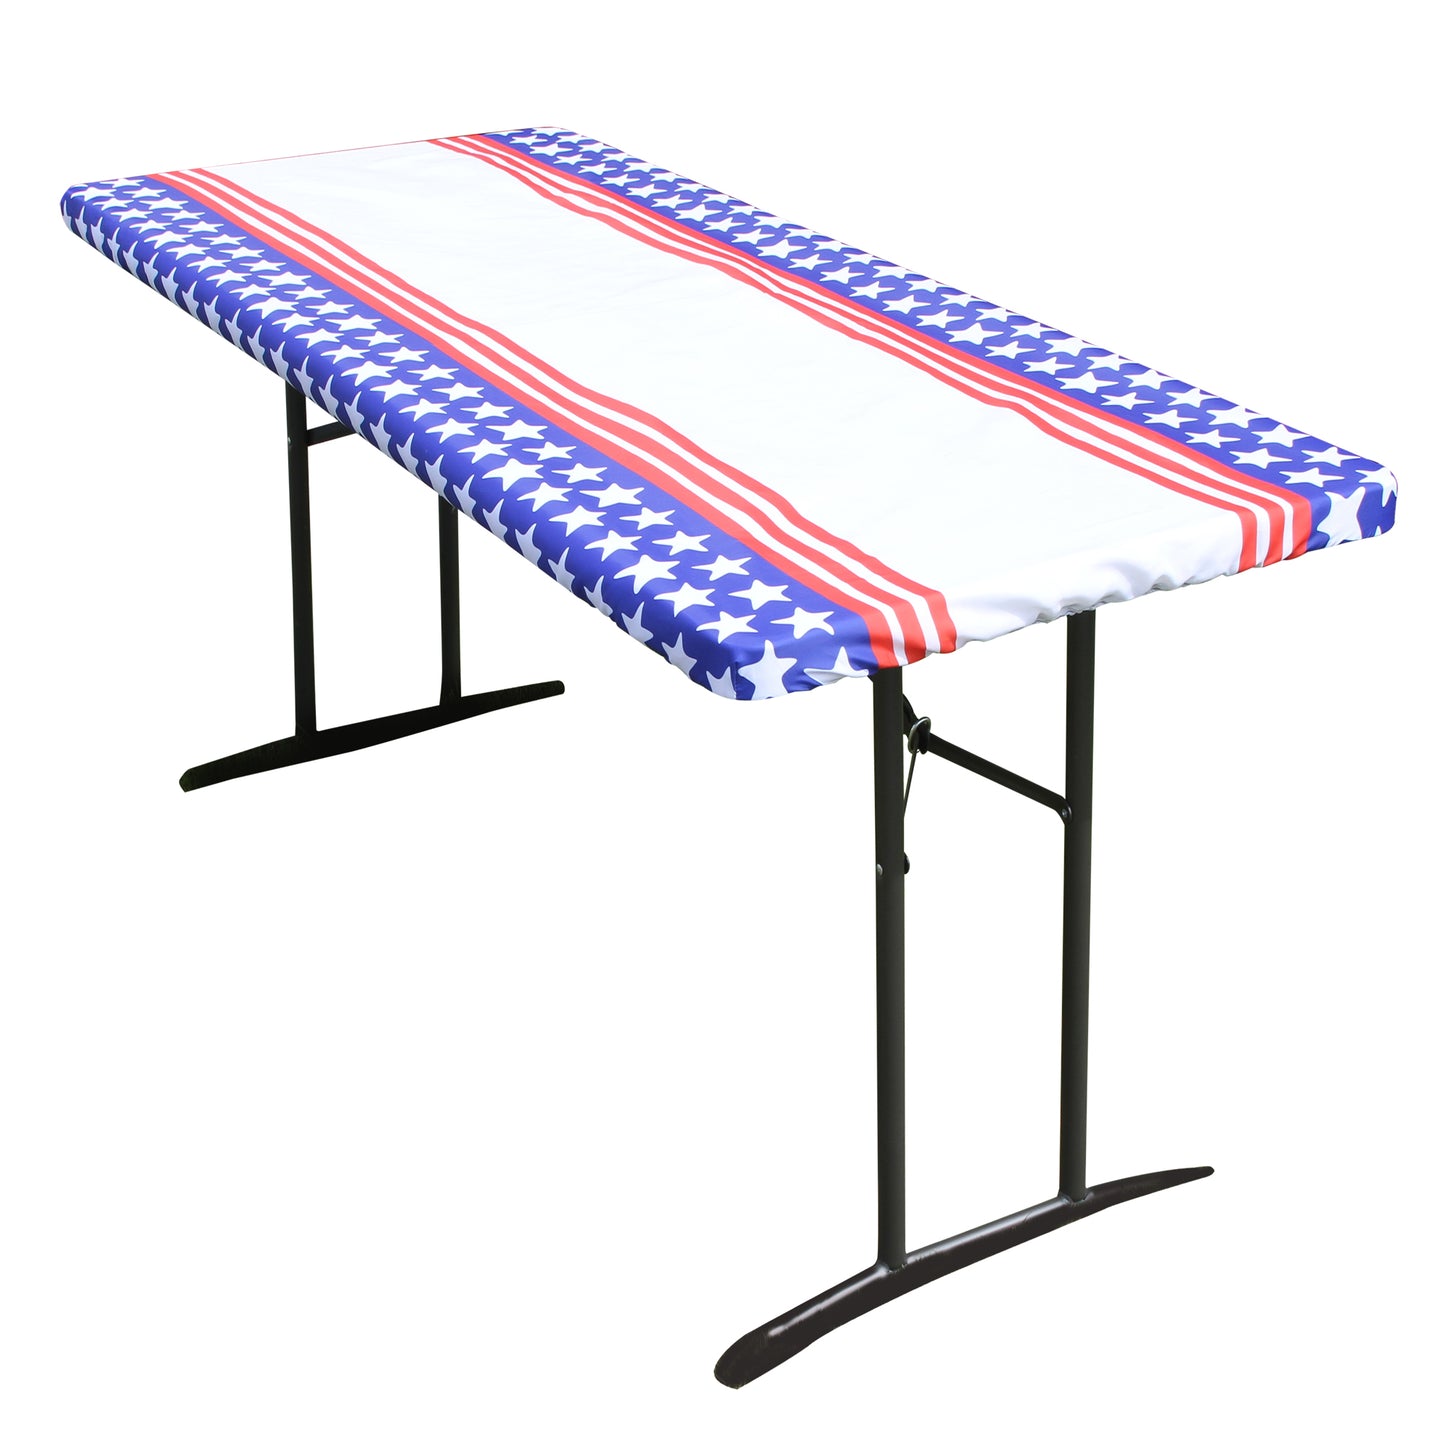 A person stretching TableCloth PLUS 72" Stars & Stripes Fitted Polyester Tablecloth for 6' Folding Tables over a folding table